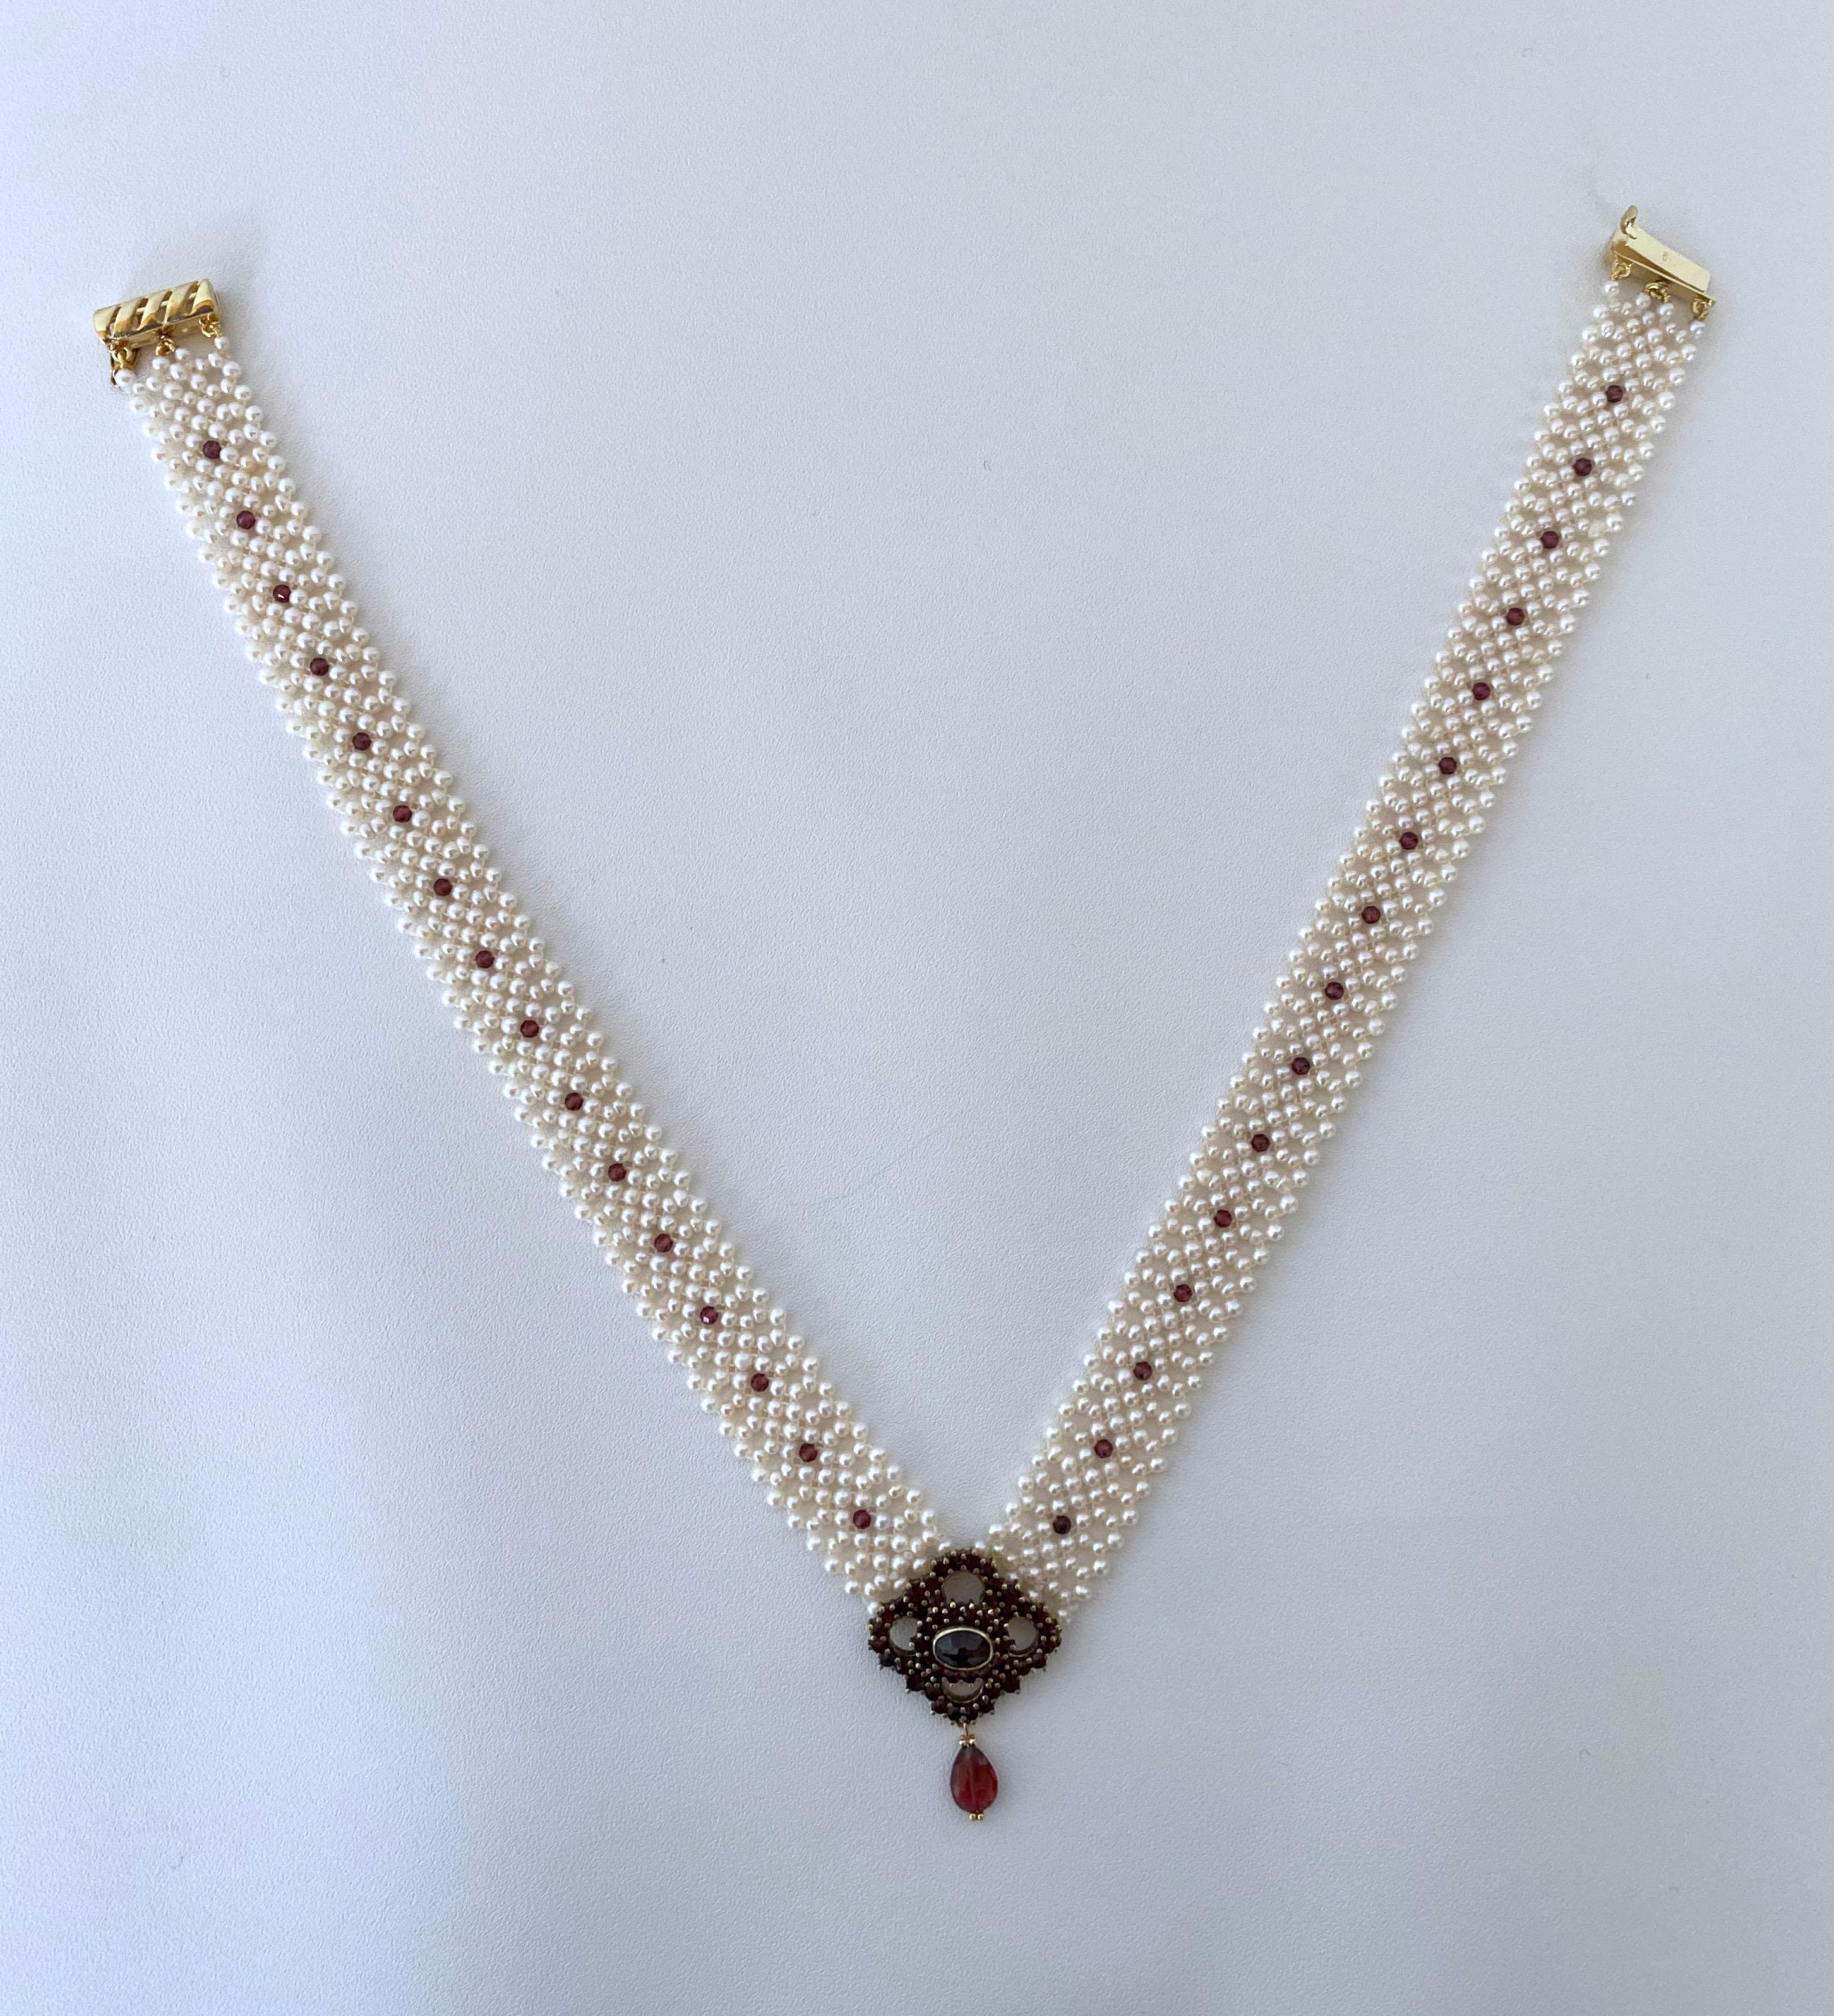 Marina J. All Pearl Woven Necklace with Vintage Garnet Centerpiece For Sale 6